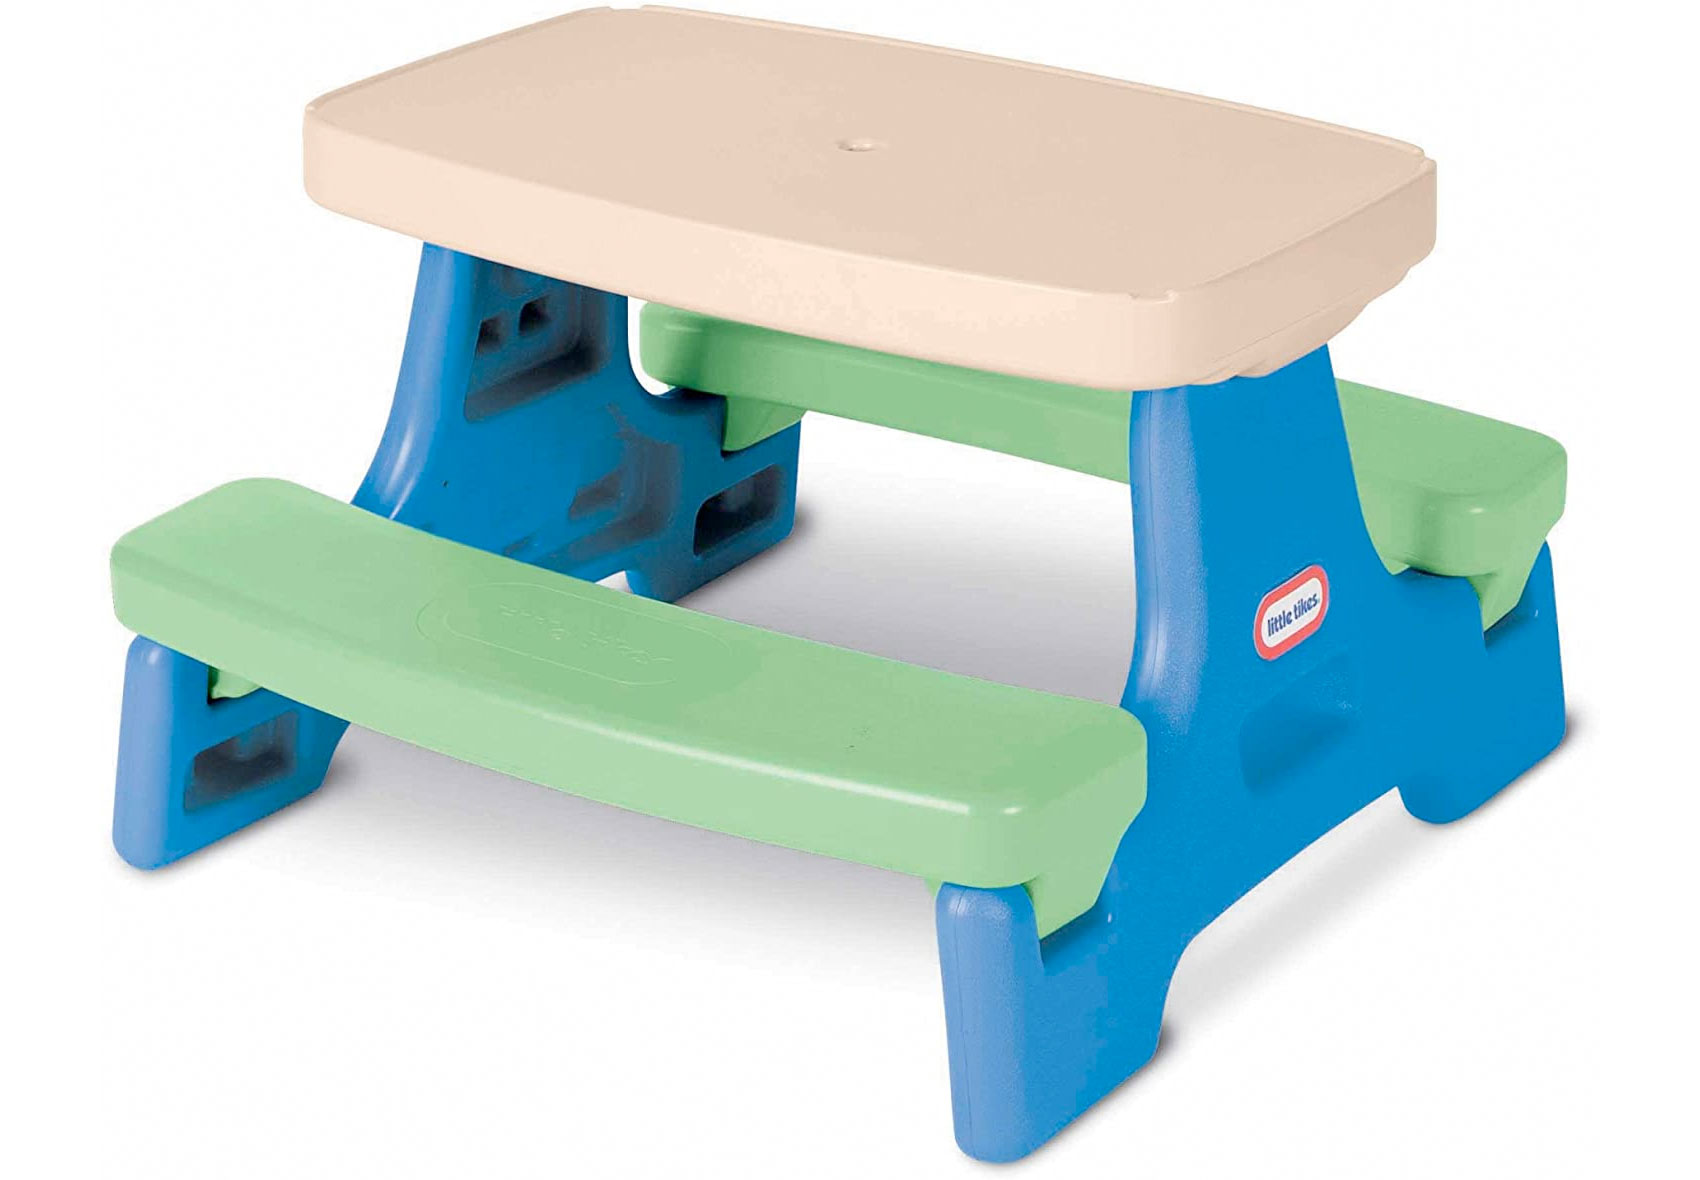 Amazon：Little Tikes Easy Store Jr. Play Table只卖$59.97